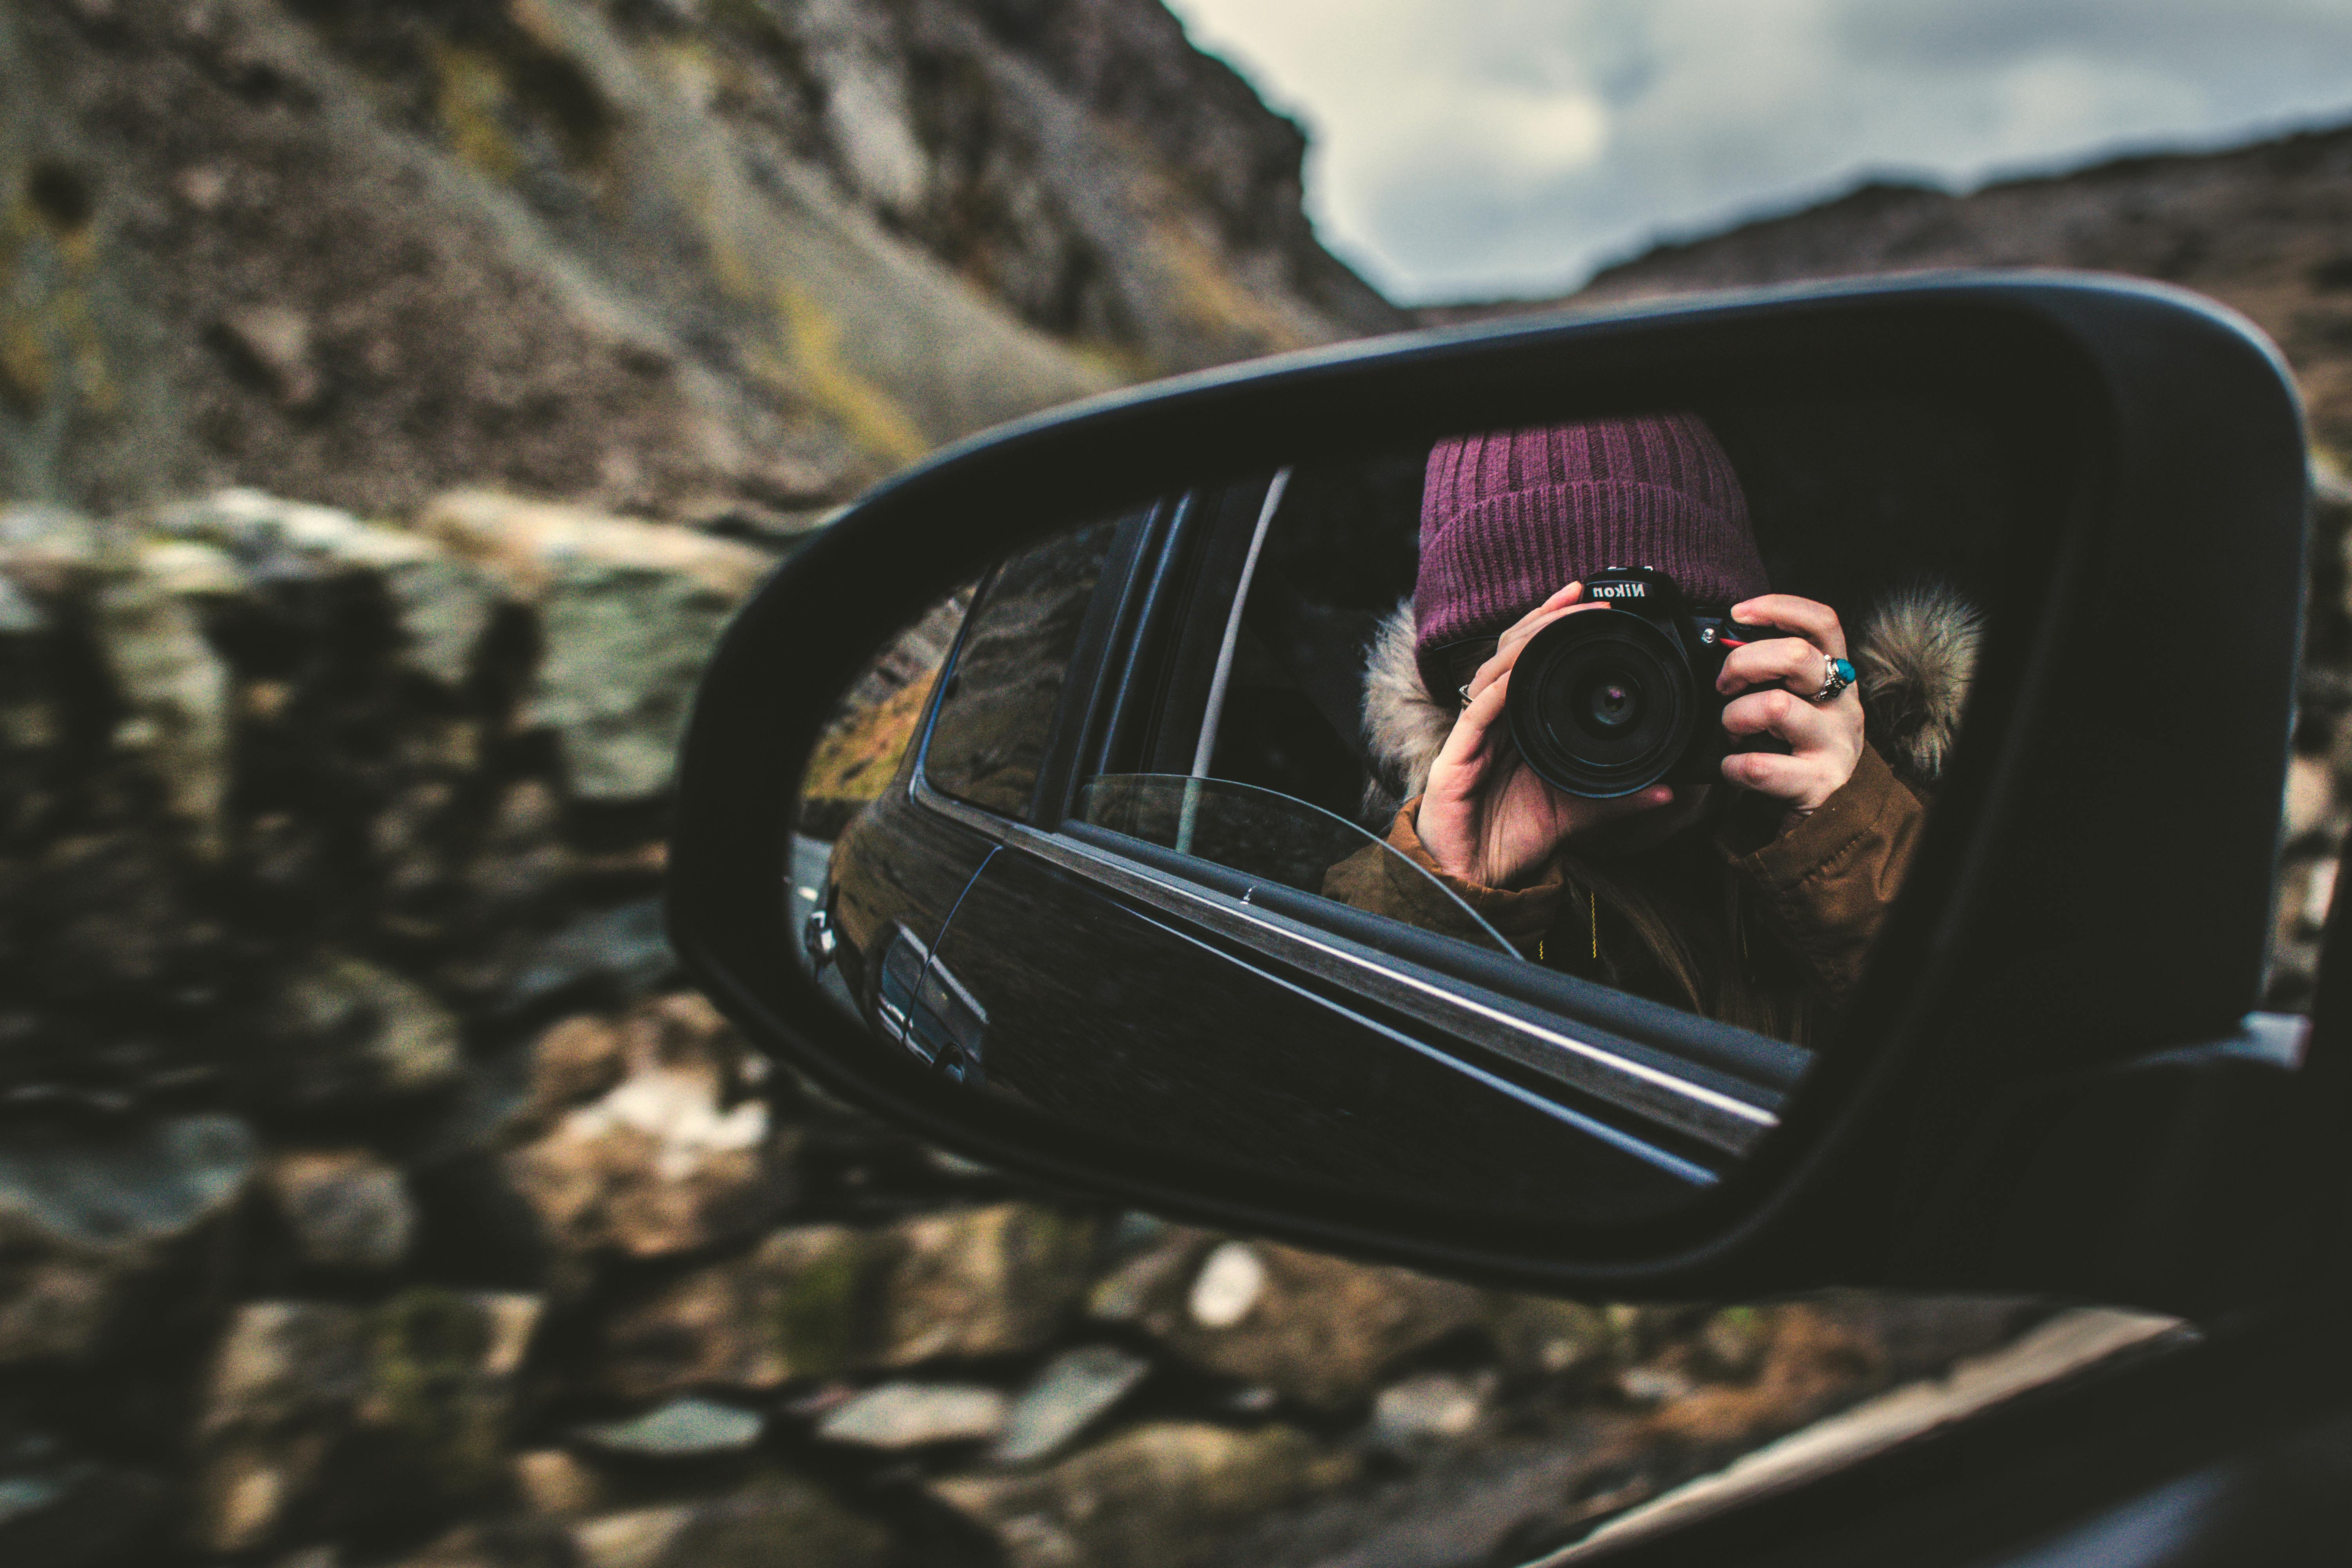 Person Holding Dslr Camera Reflected on Black Framed Wing Mirror